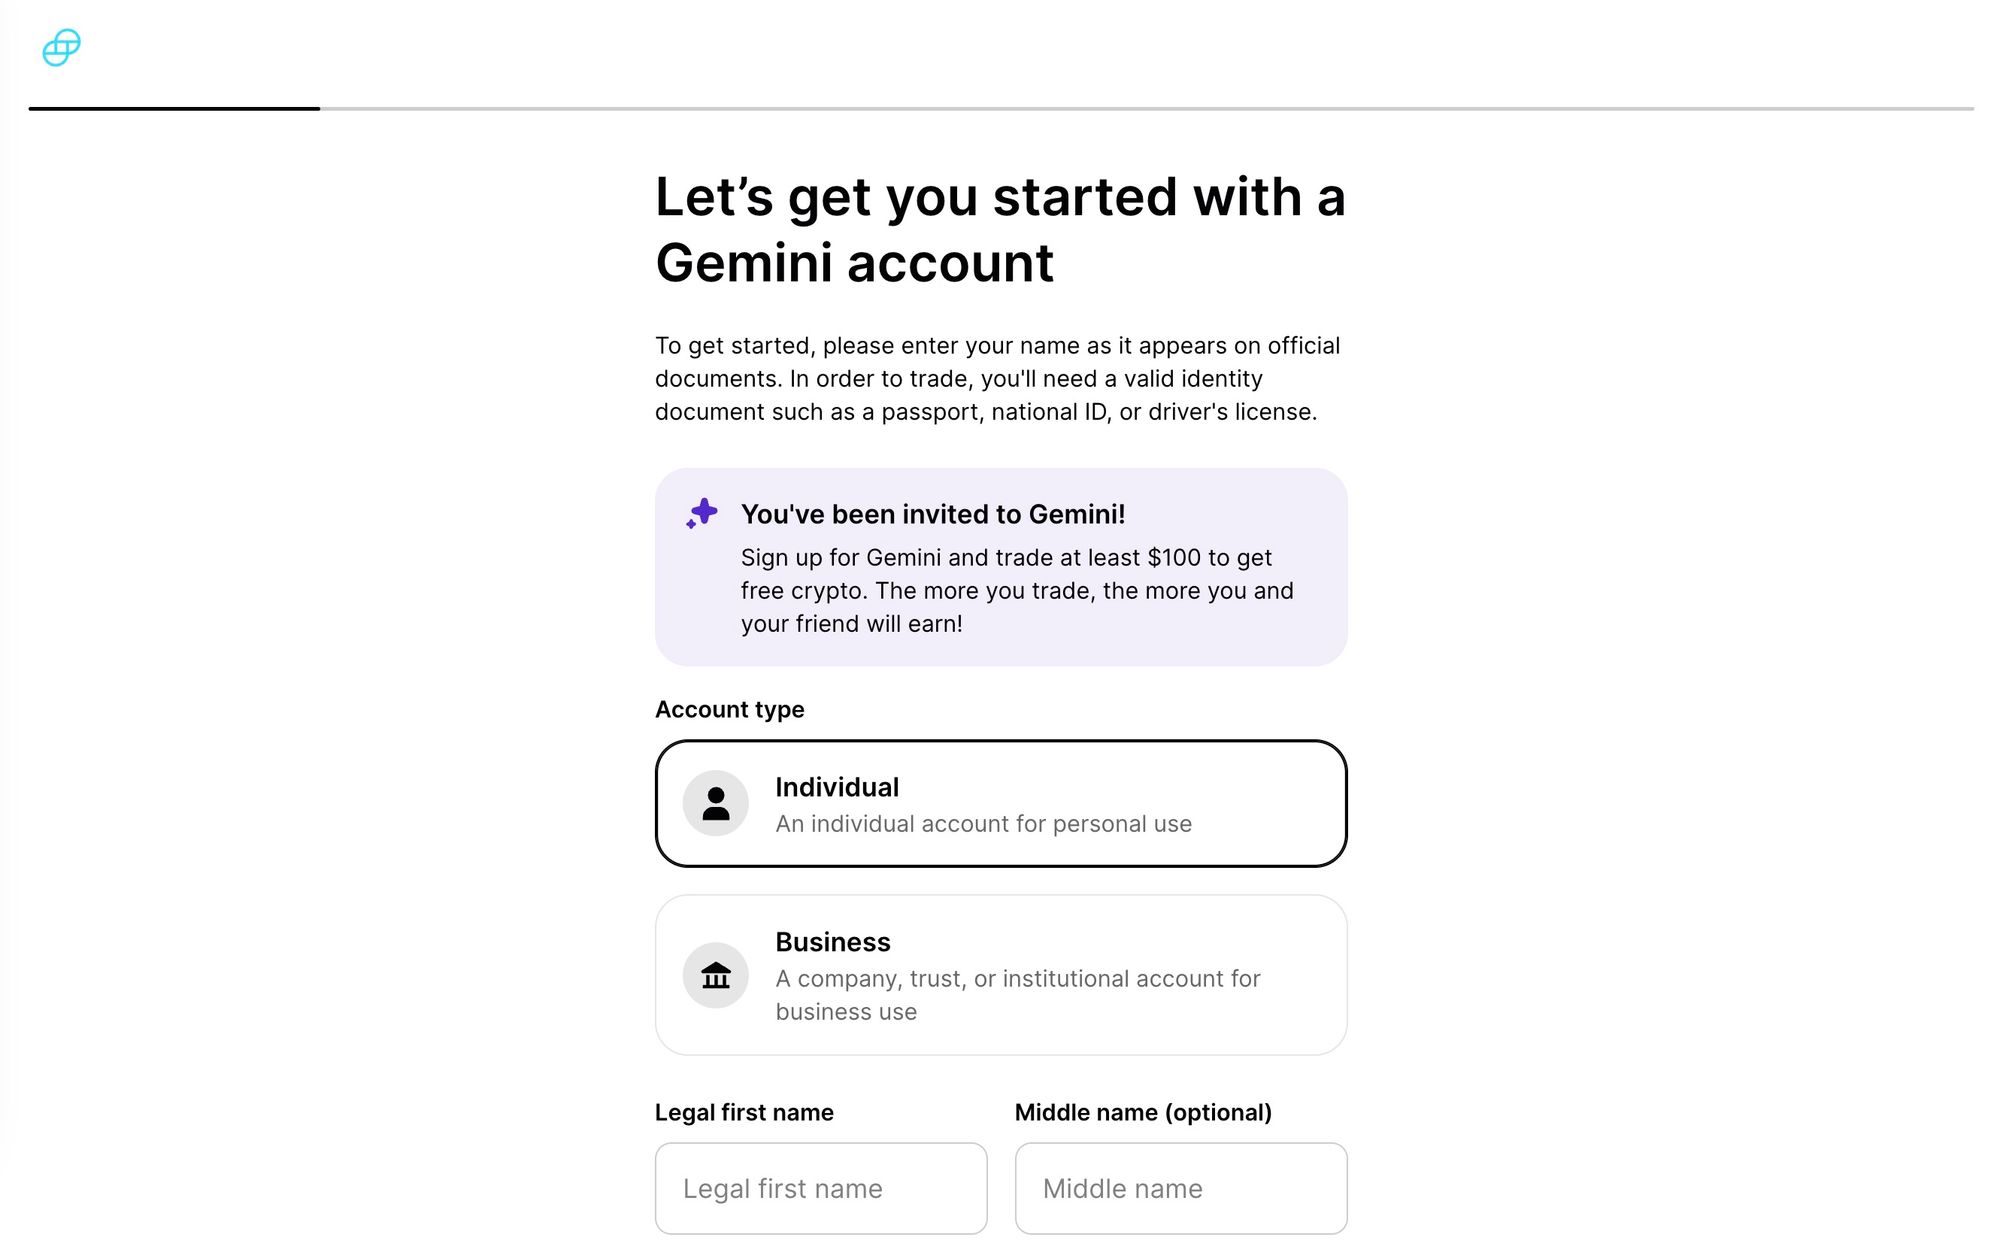 How To Sign Up For Gemini Step 1